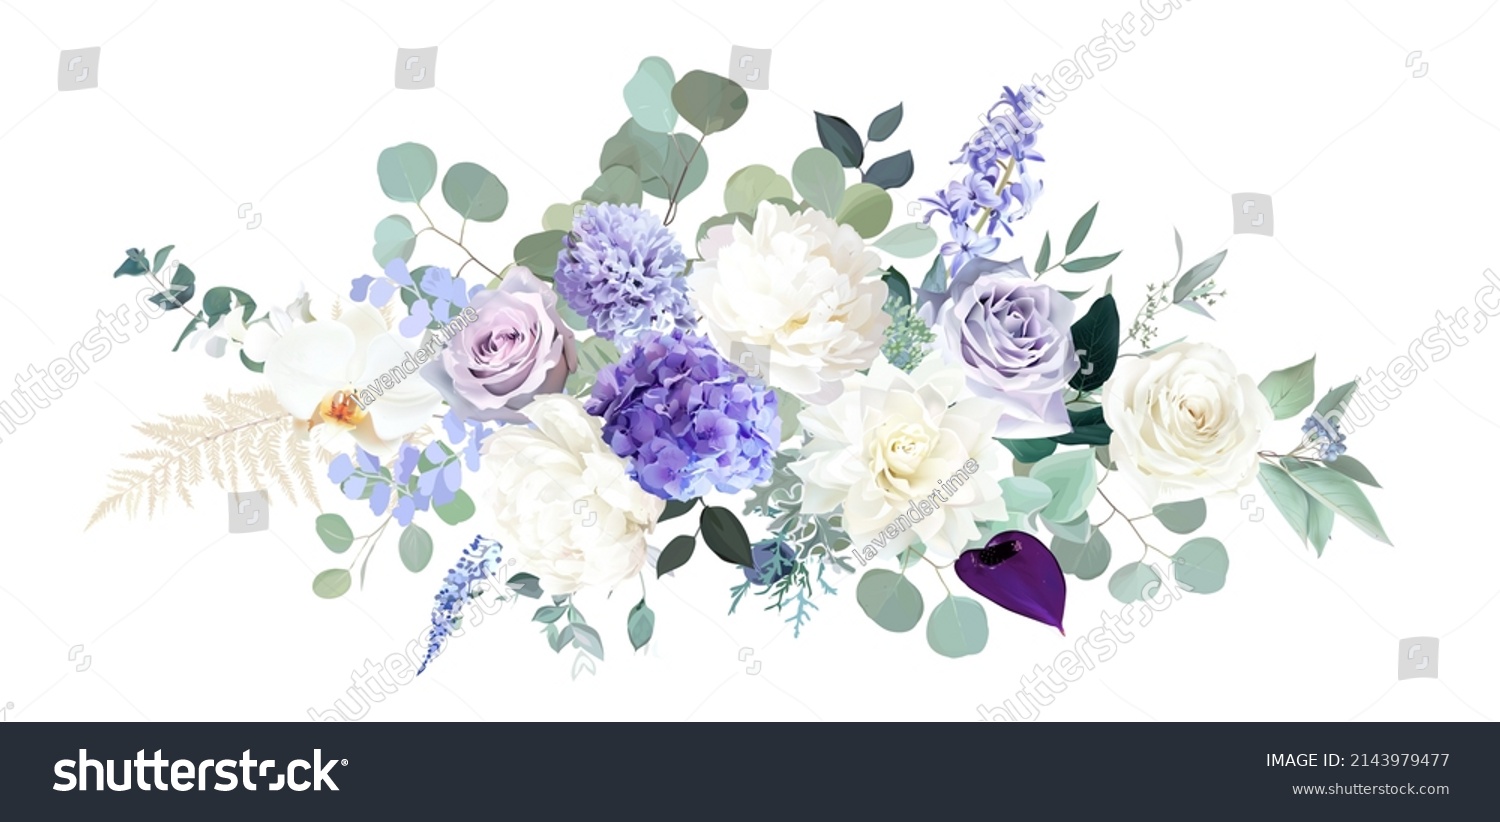 SVG of Pale purple rose, dusty mauve and lilac hyacinth, hydrangea, white dahlia, peony, orchid, dried fern, eucalyptus vector design bouquet. Stylish wedding flower. Elements are isolated and editable svg